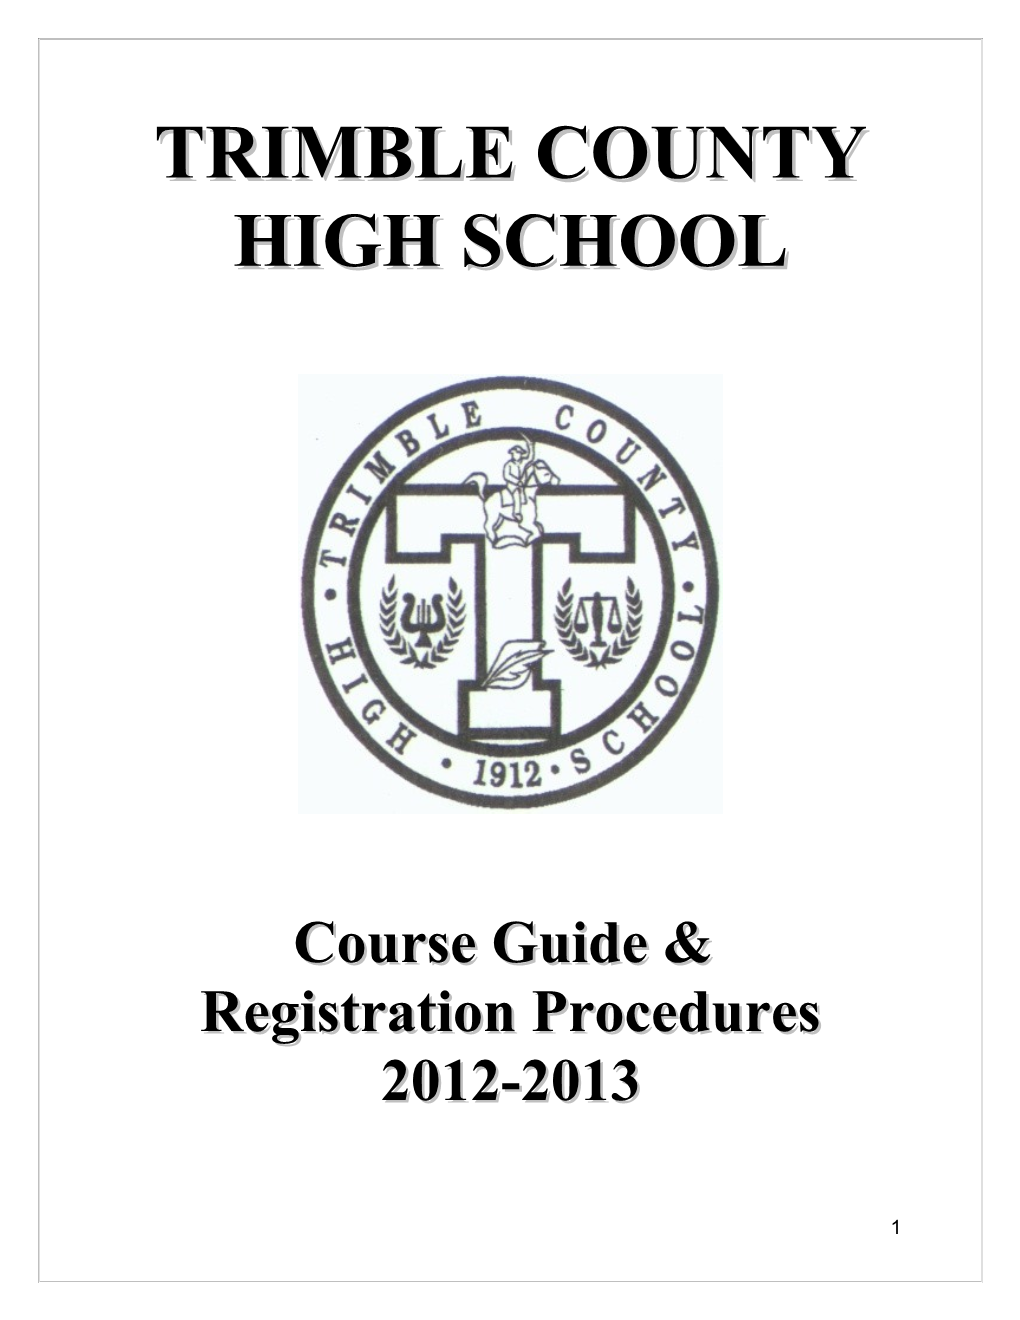 Graduation Requirements for Class of 2013 and Beyond 2